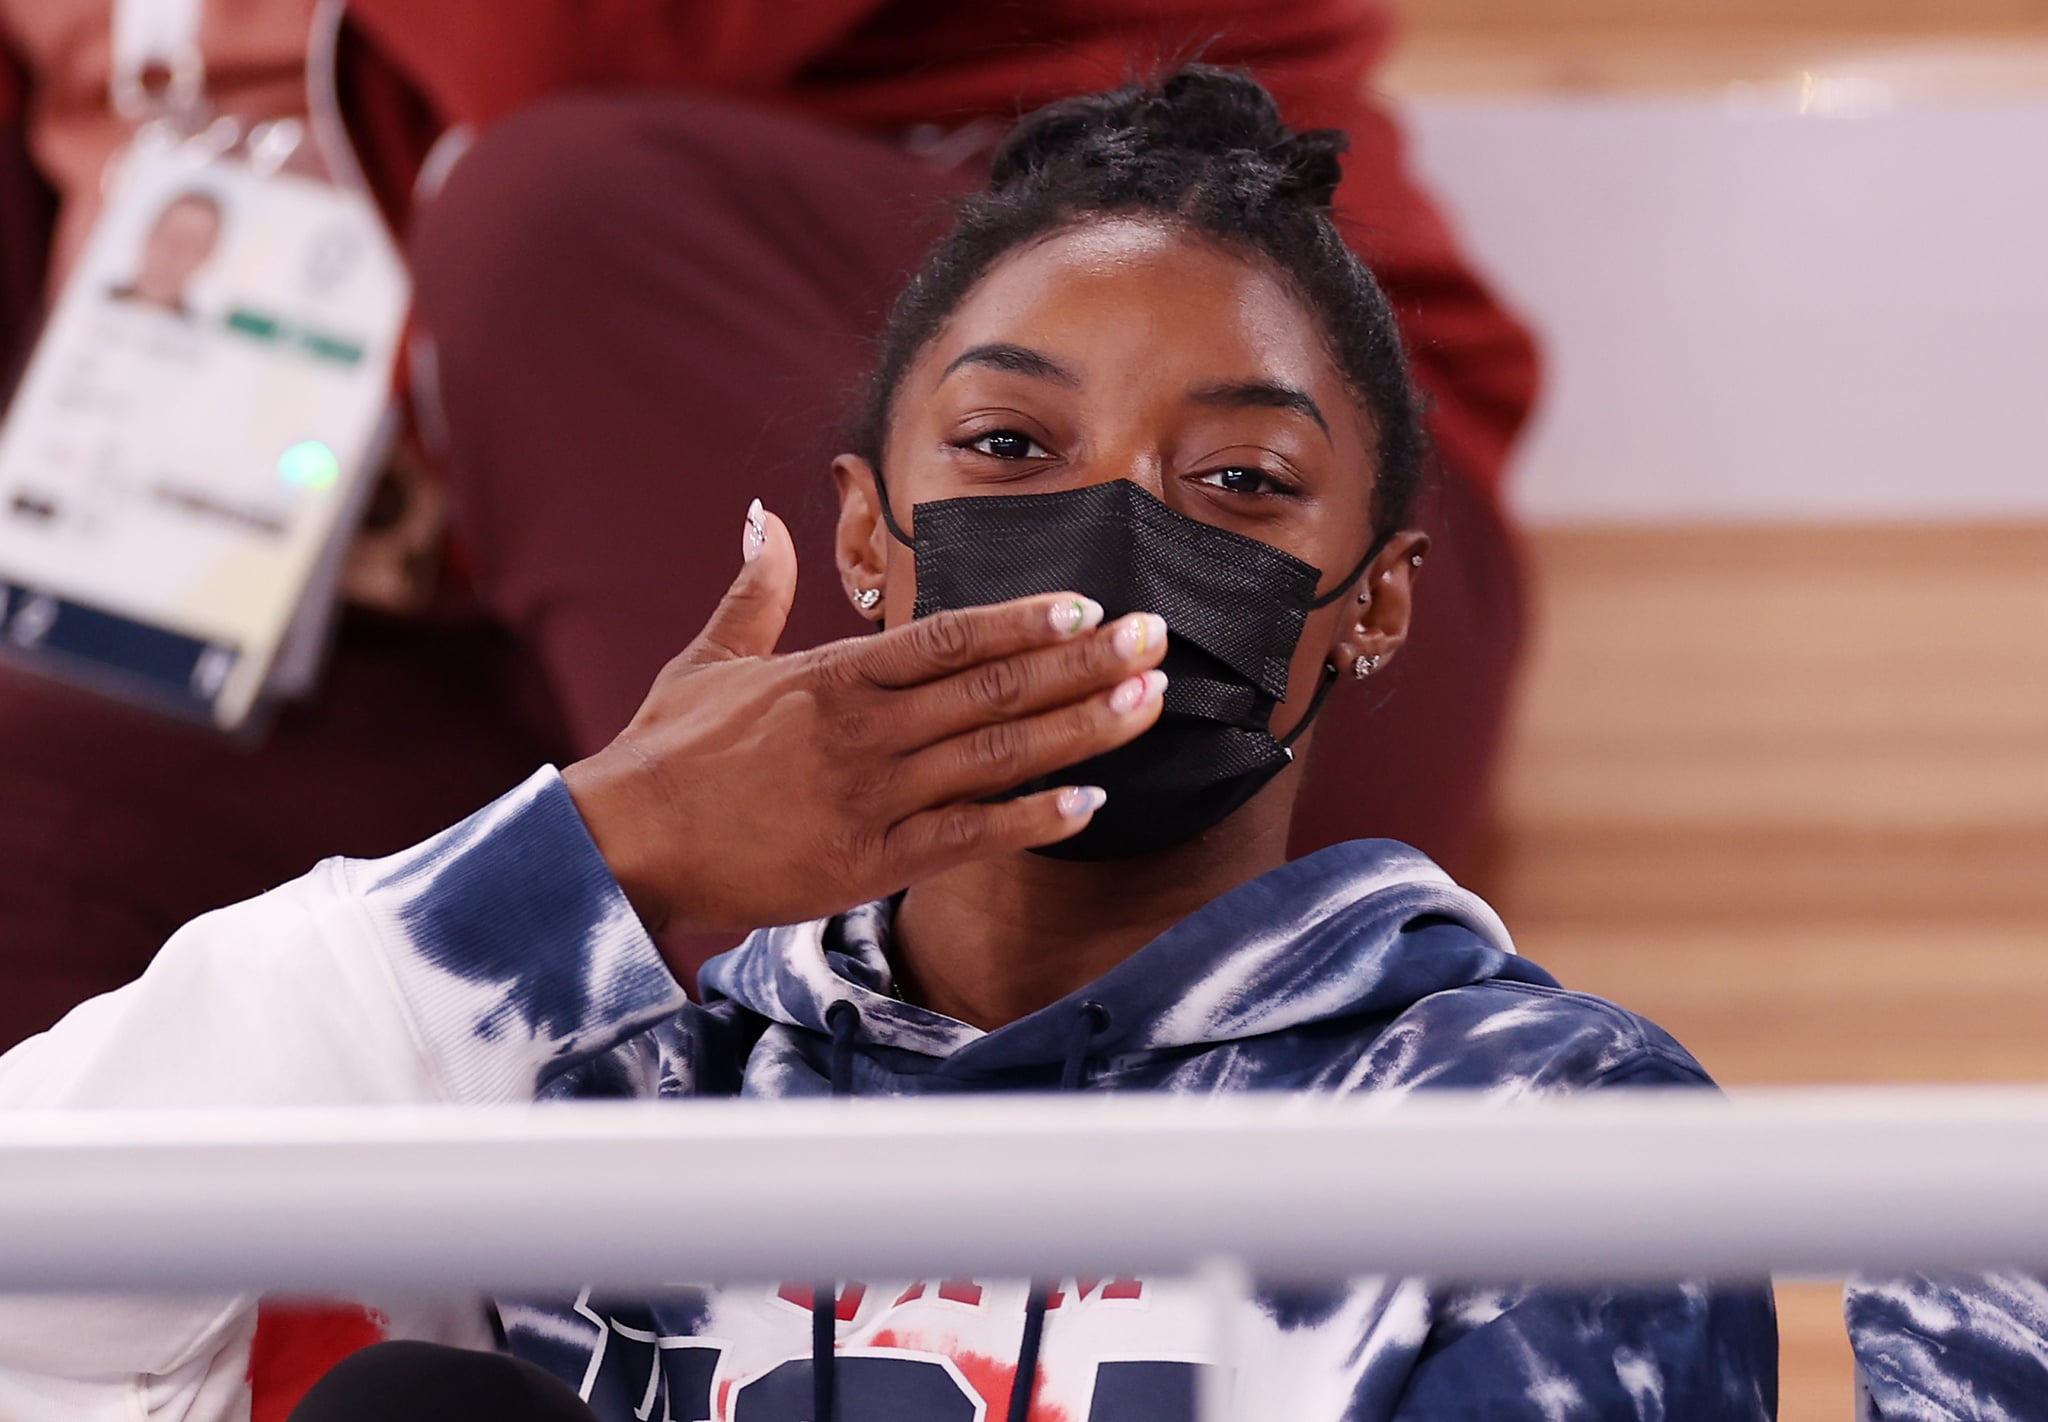 TOKYO, JAPAN - JULY 28: Simone Biles of Team United States blows a kiss whilst watching the Men's All-Around Final on day five of the Tokyo 2020 Olympic Games at Ariake Gymnastics Centre on July 28, 2021 in Tokyo, Japan. (Photo by Jamie Squire/Getty Images)